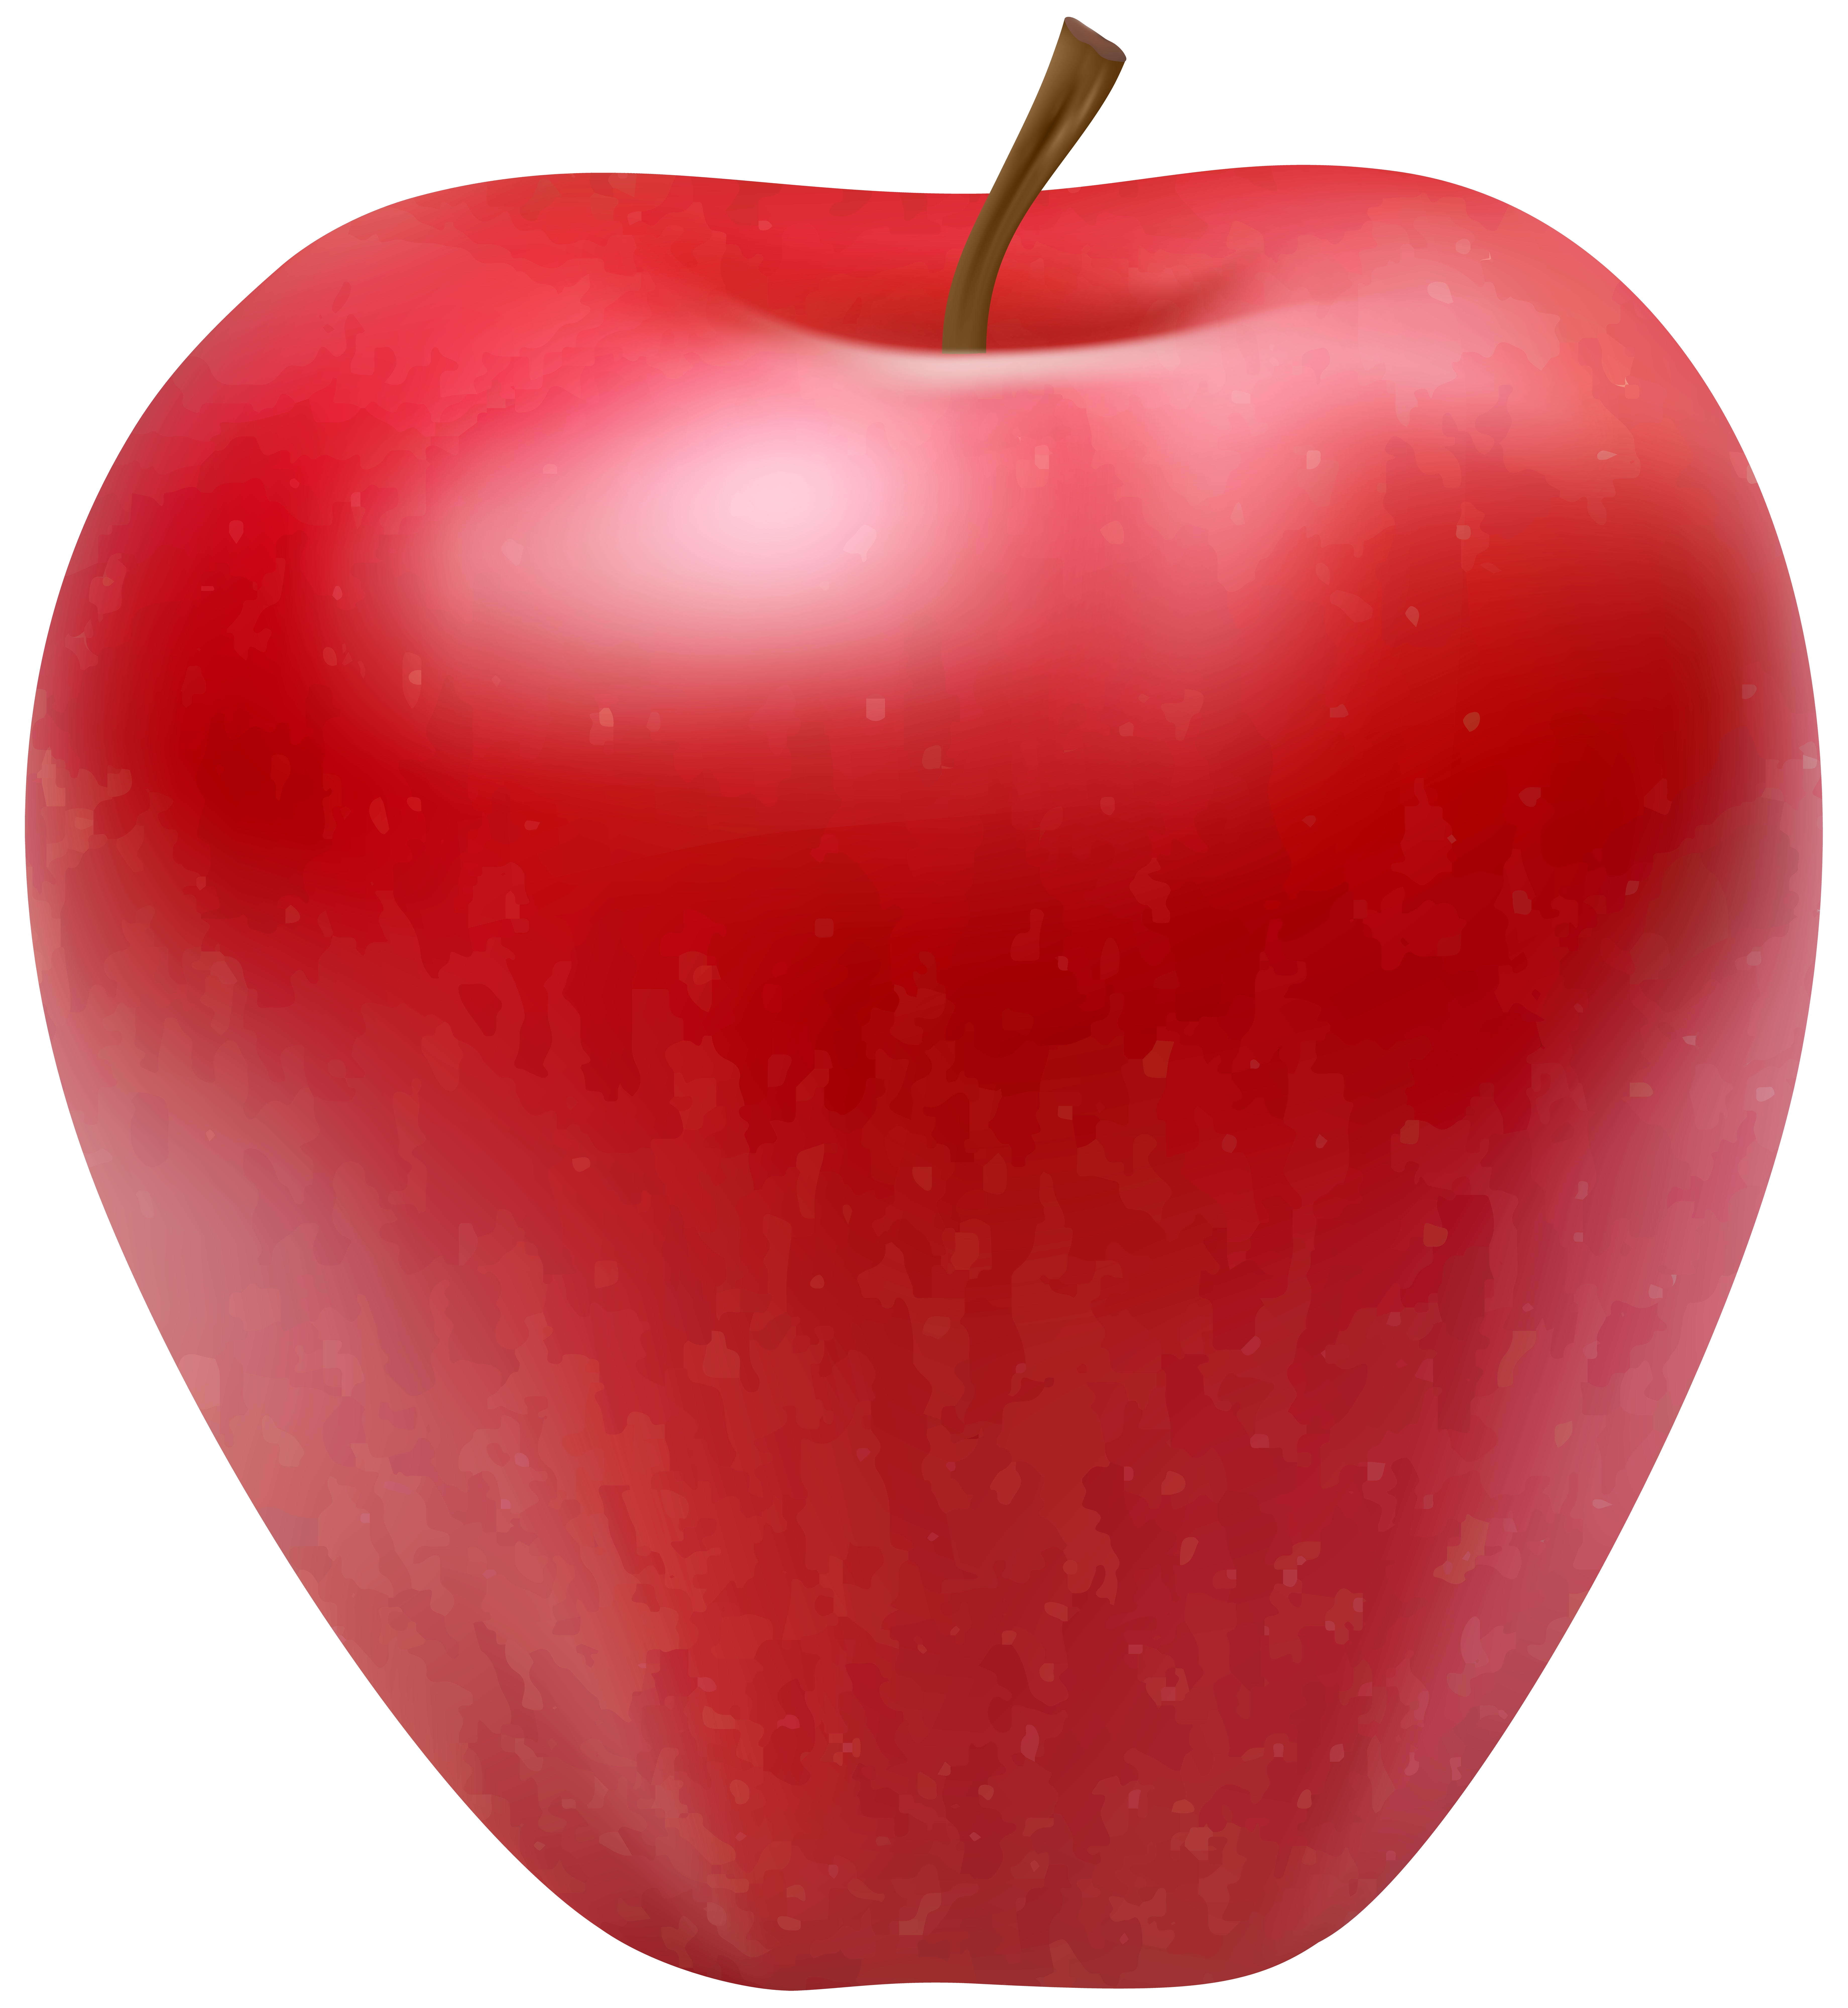 Red Apple Png Clip Art Image Gallery Yopriceville High Quality Images And Transparent Png Free Clipart